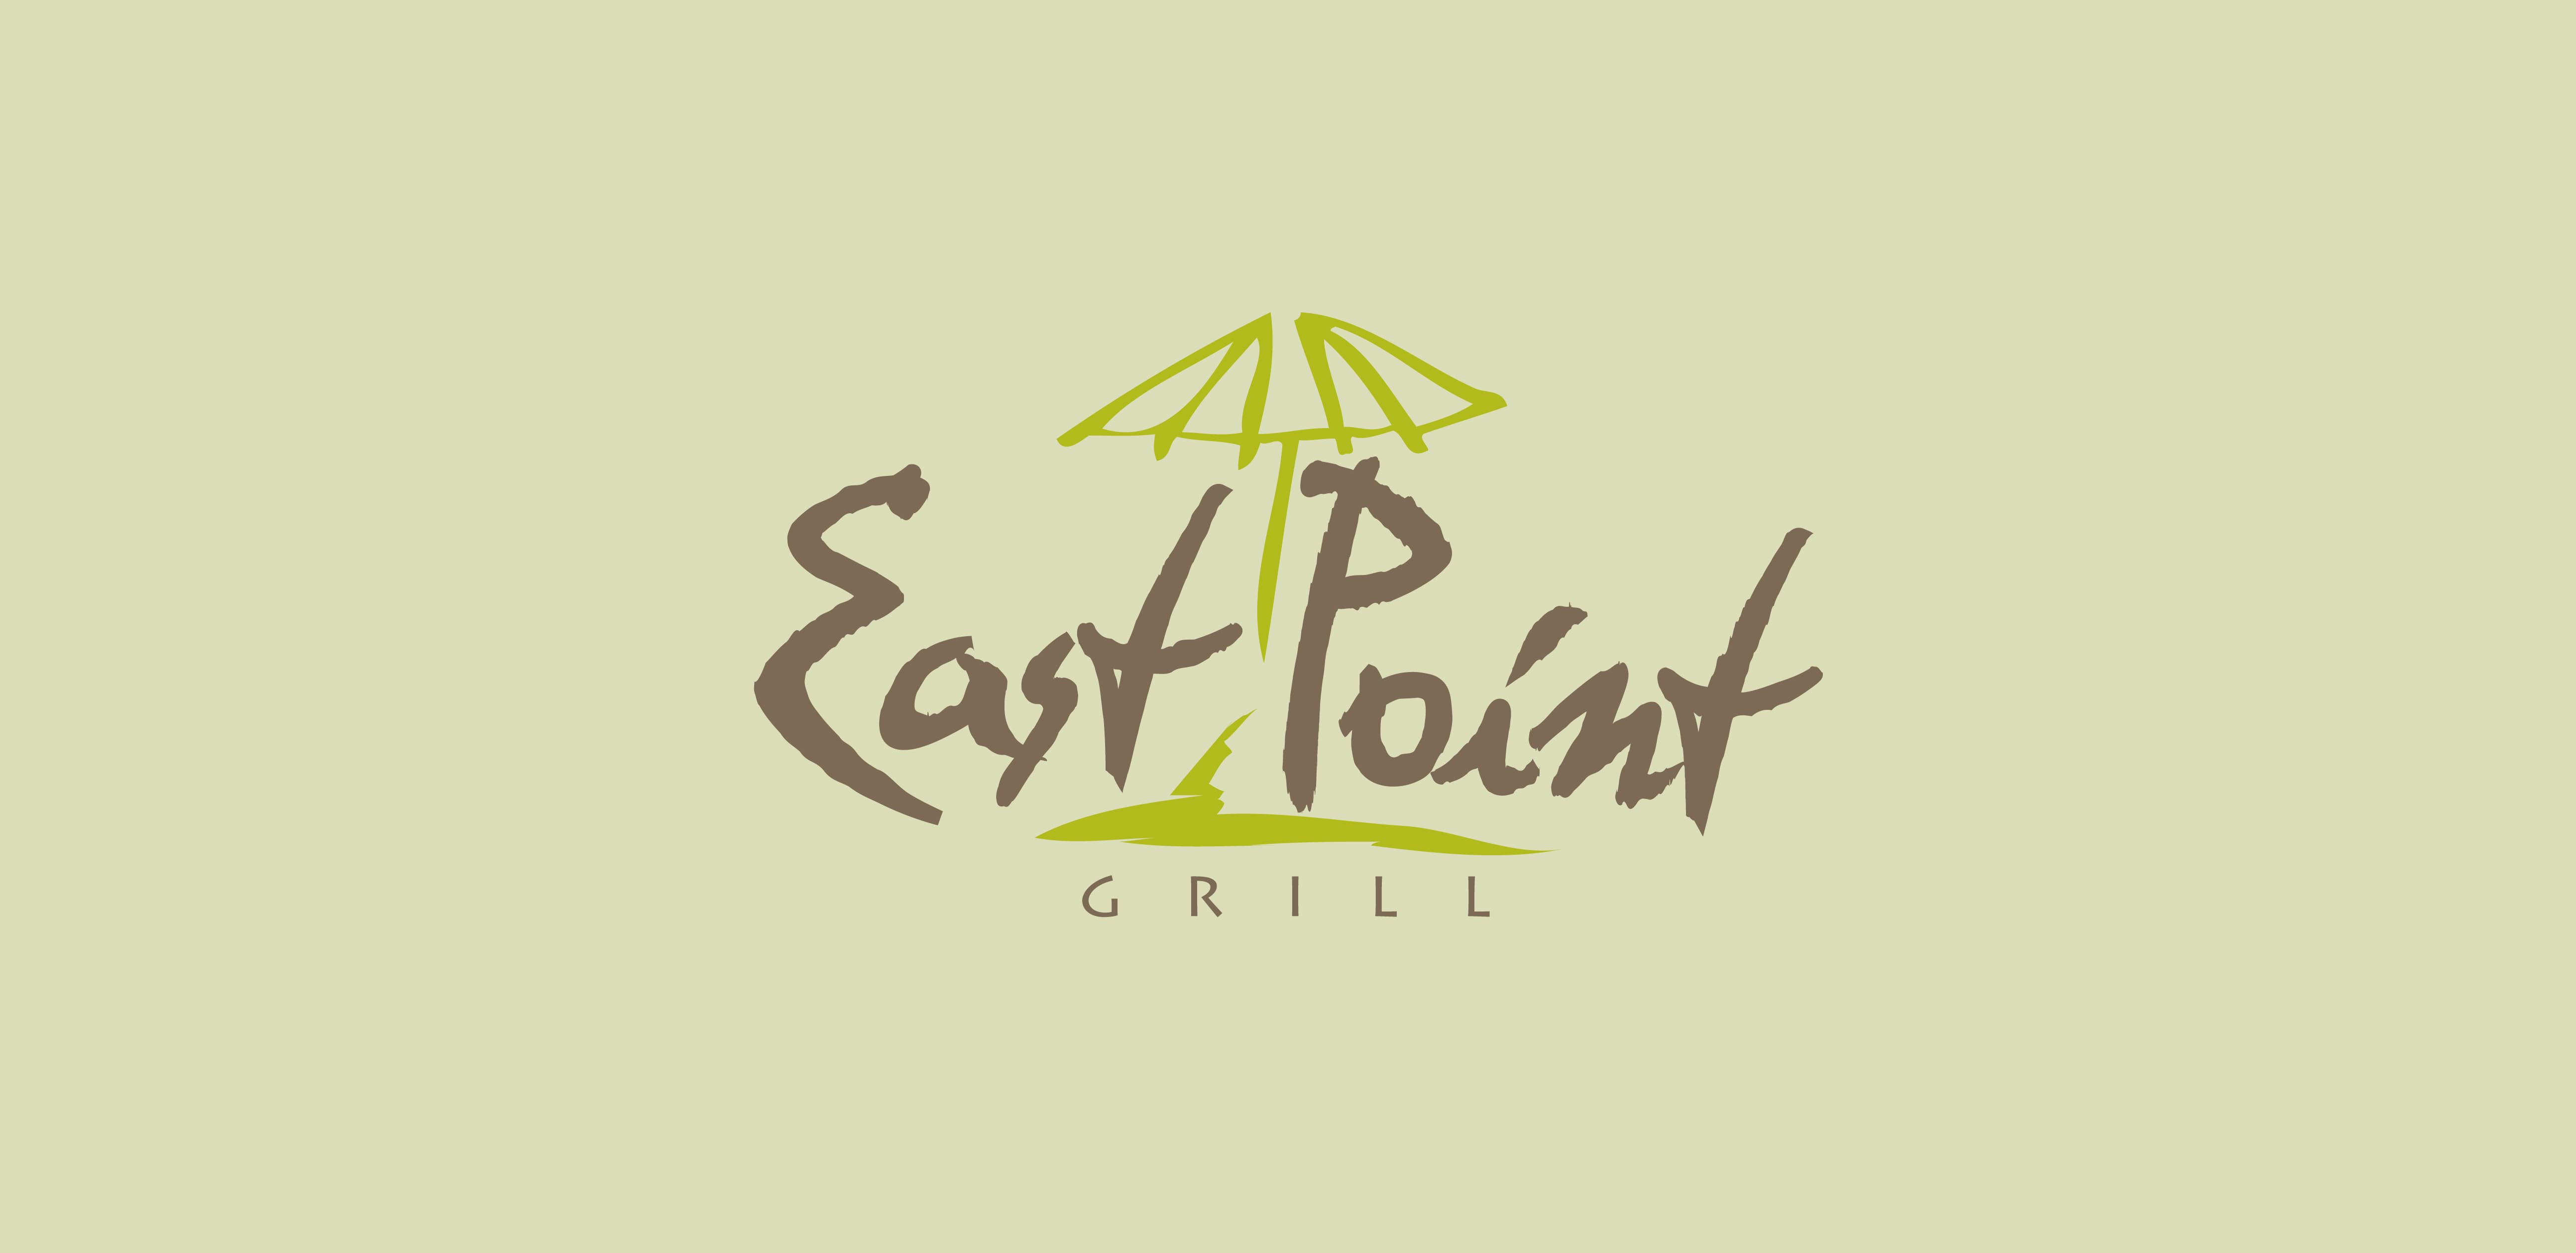 EAST POINT-GRILL-LOGO